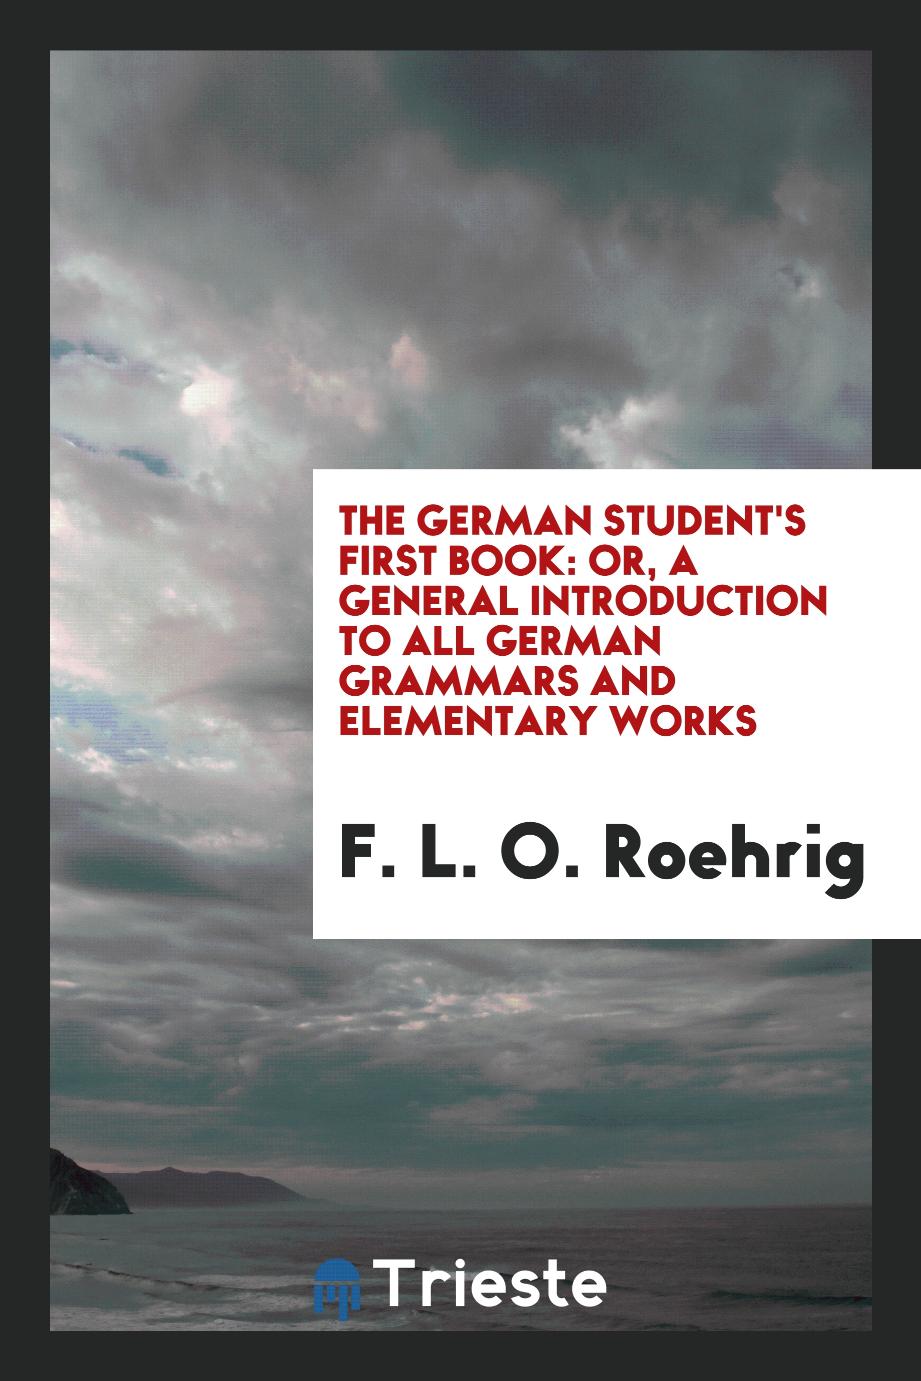 The German Student's First Book: Or, A General Introduction to All German Grammars and Elementary Works